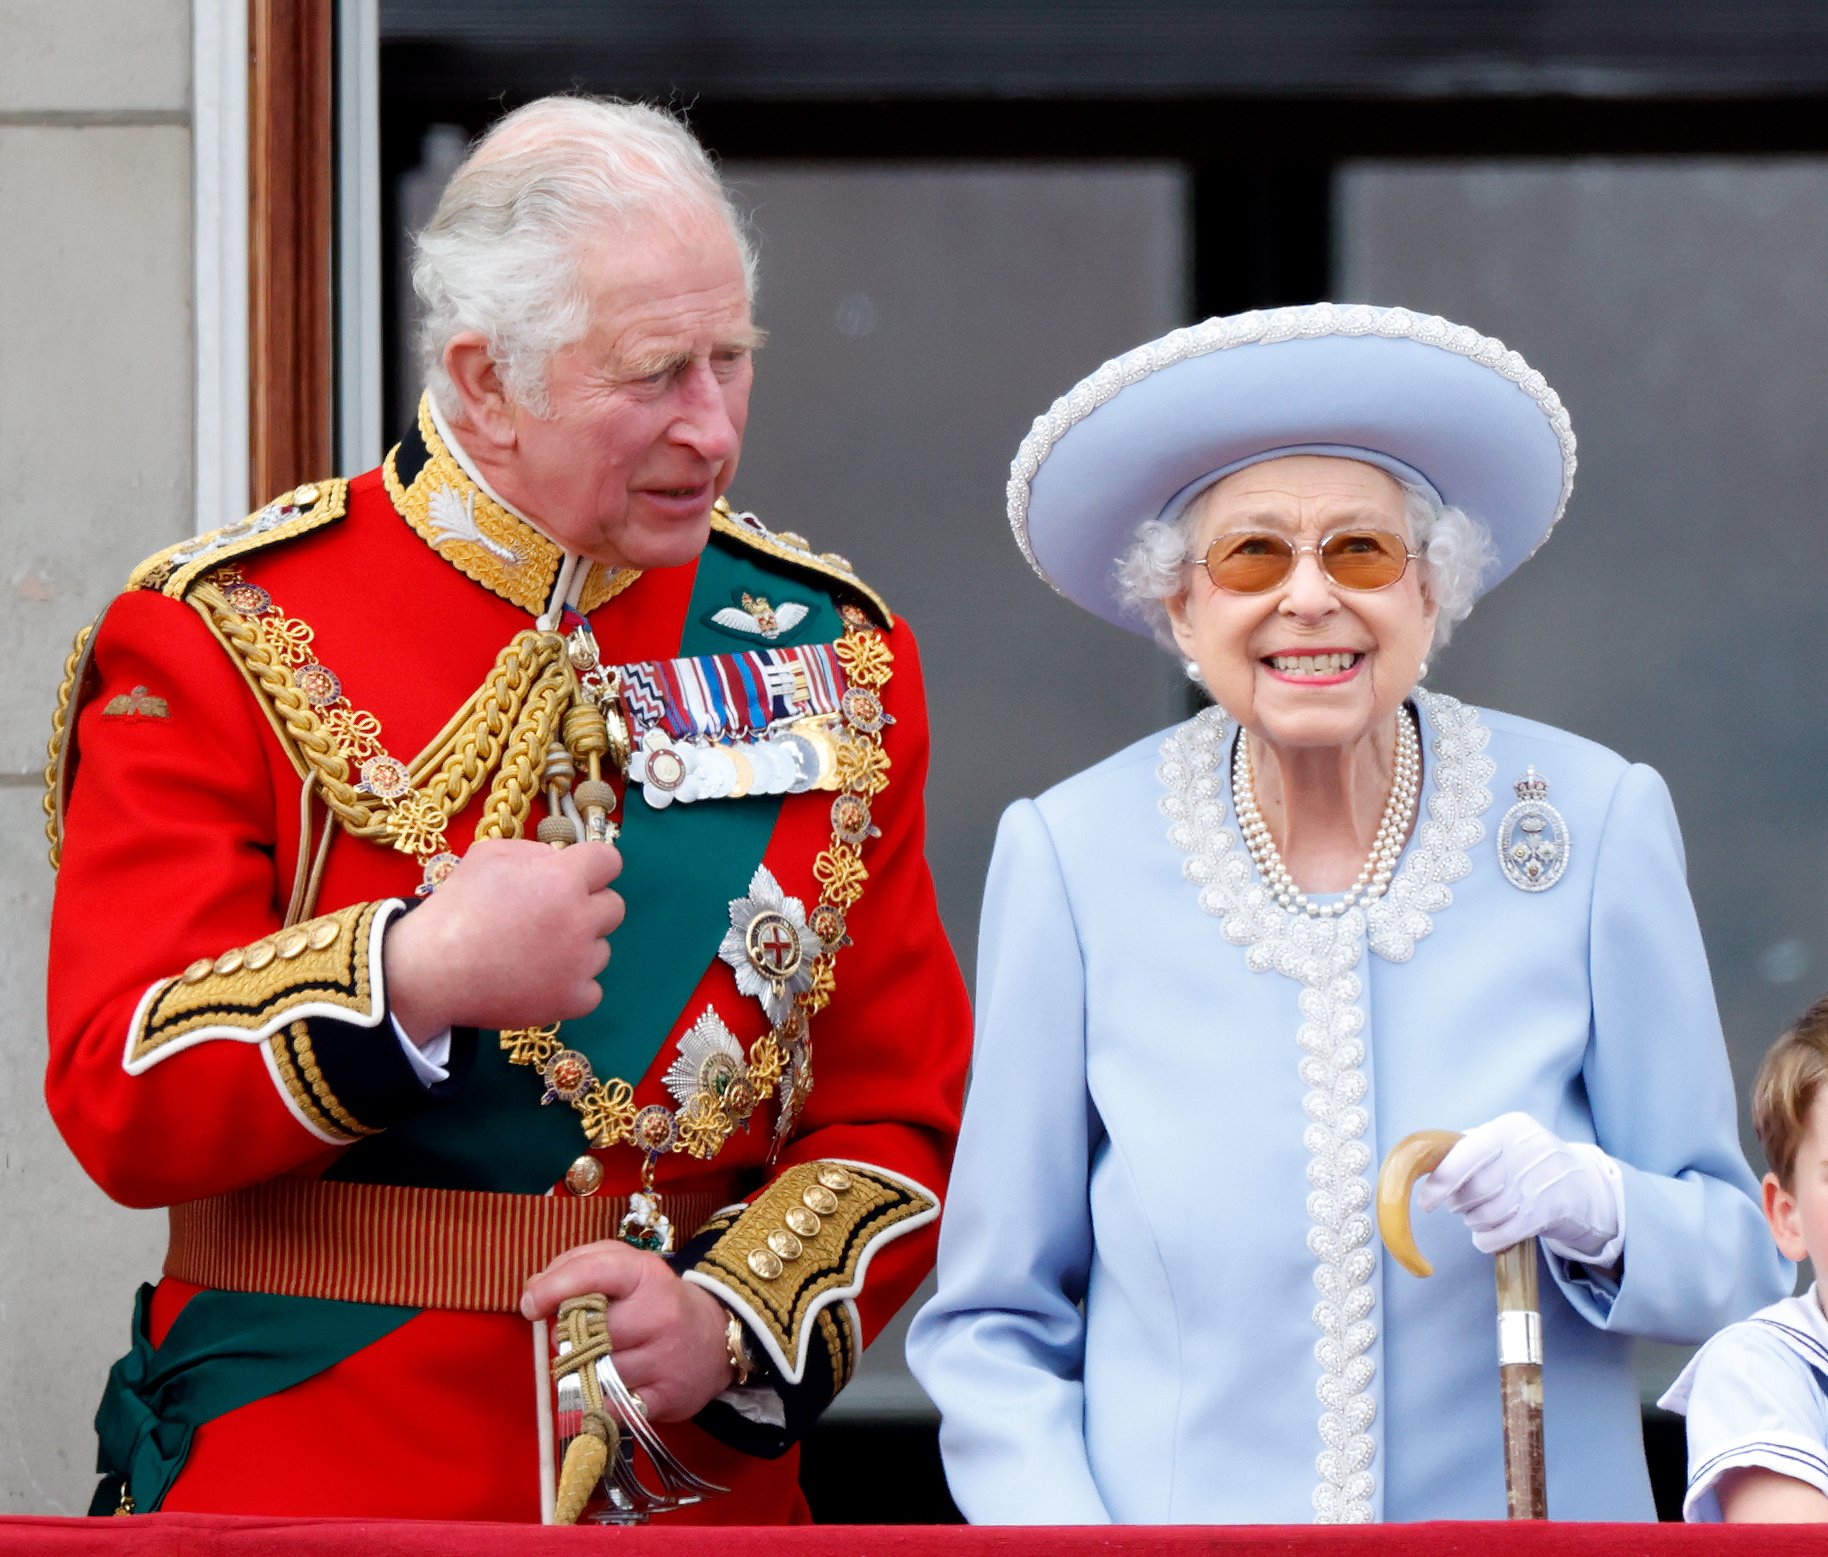 Prince (now King) Charles, and Queen Elizabeth II watch a flypast from the balcony of Buckingham Palace during Trooping the Colour on June 2, 2022 in London, England. | Source: Getty Images